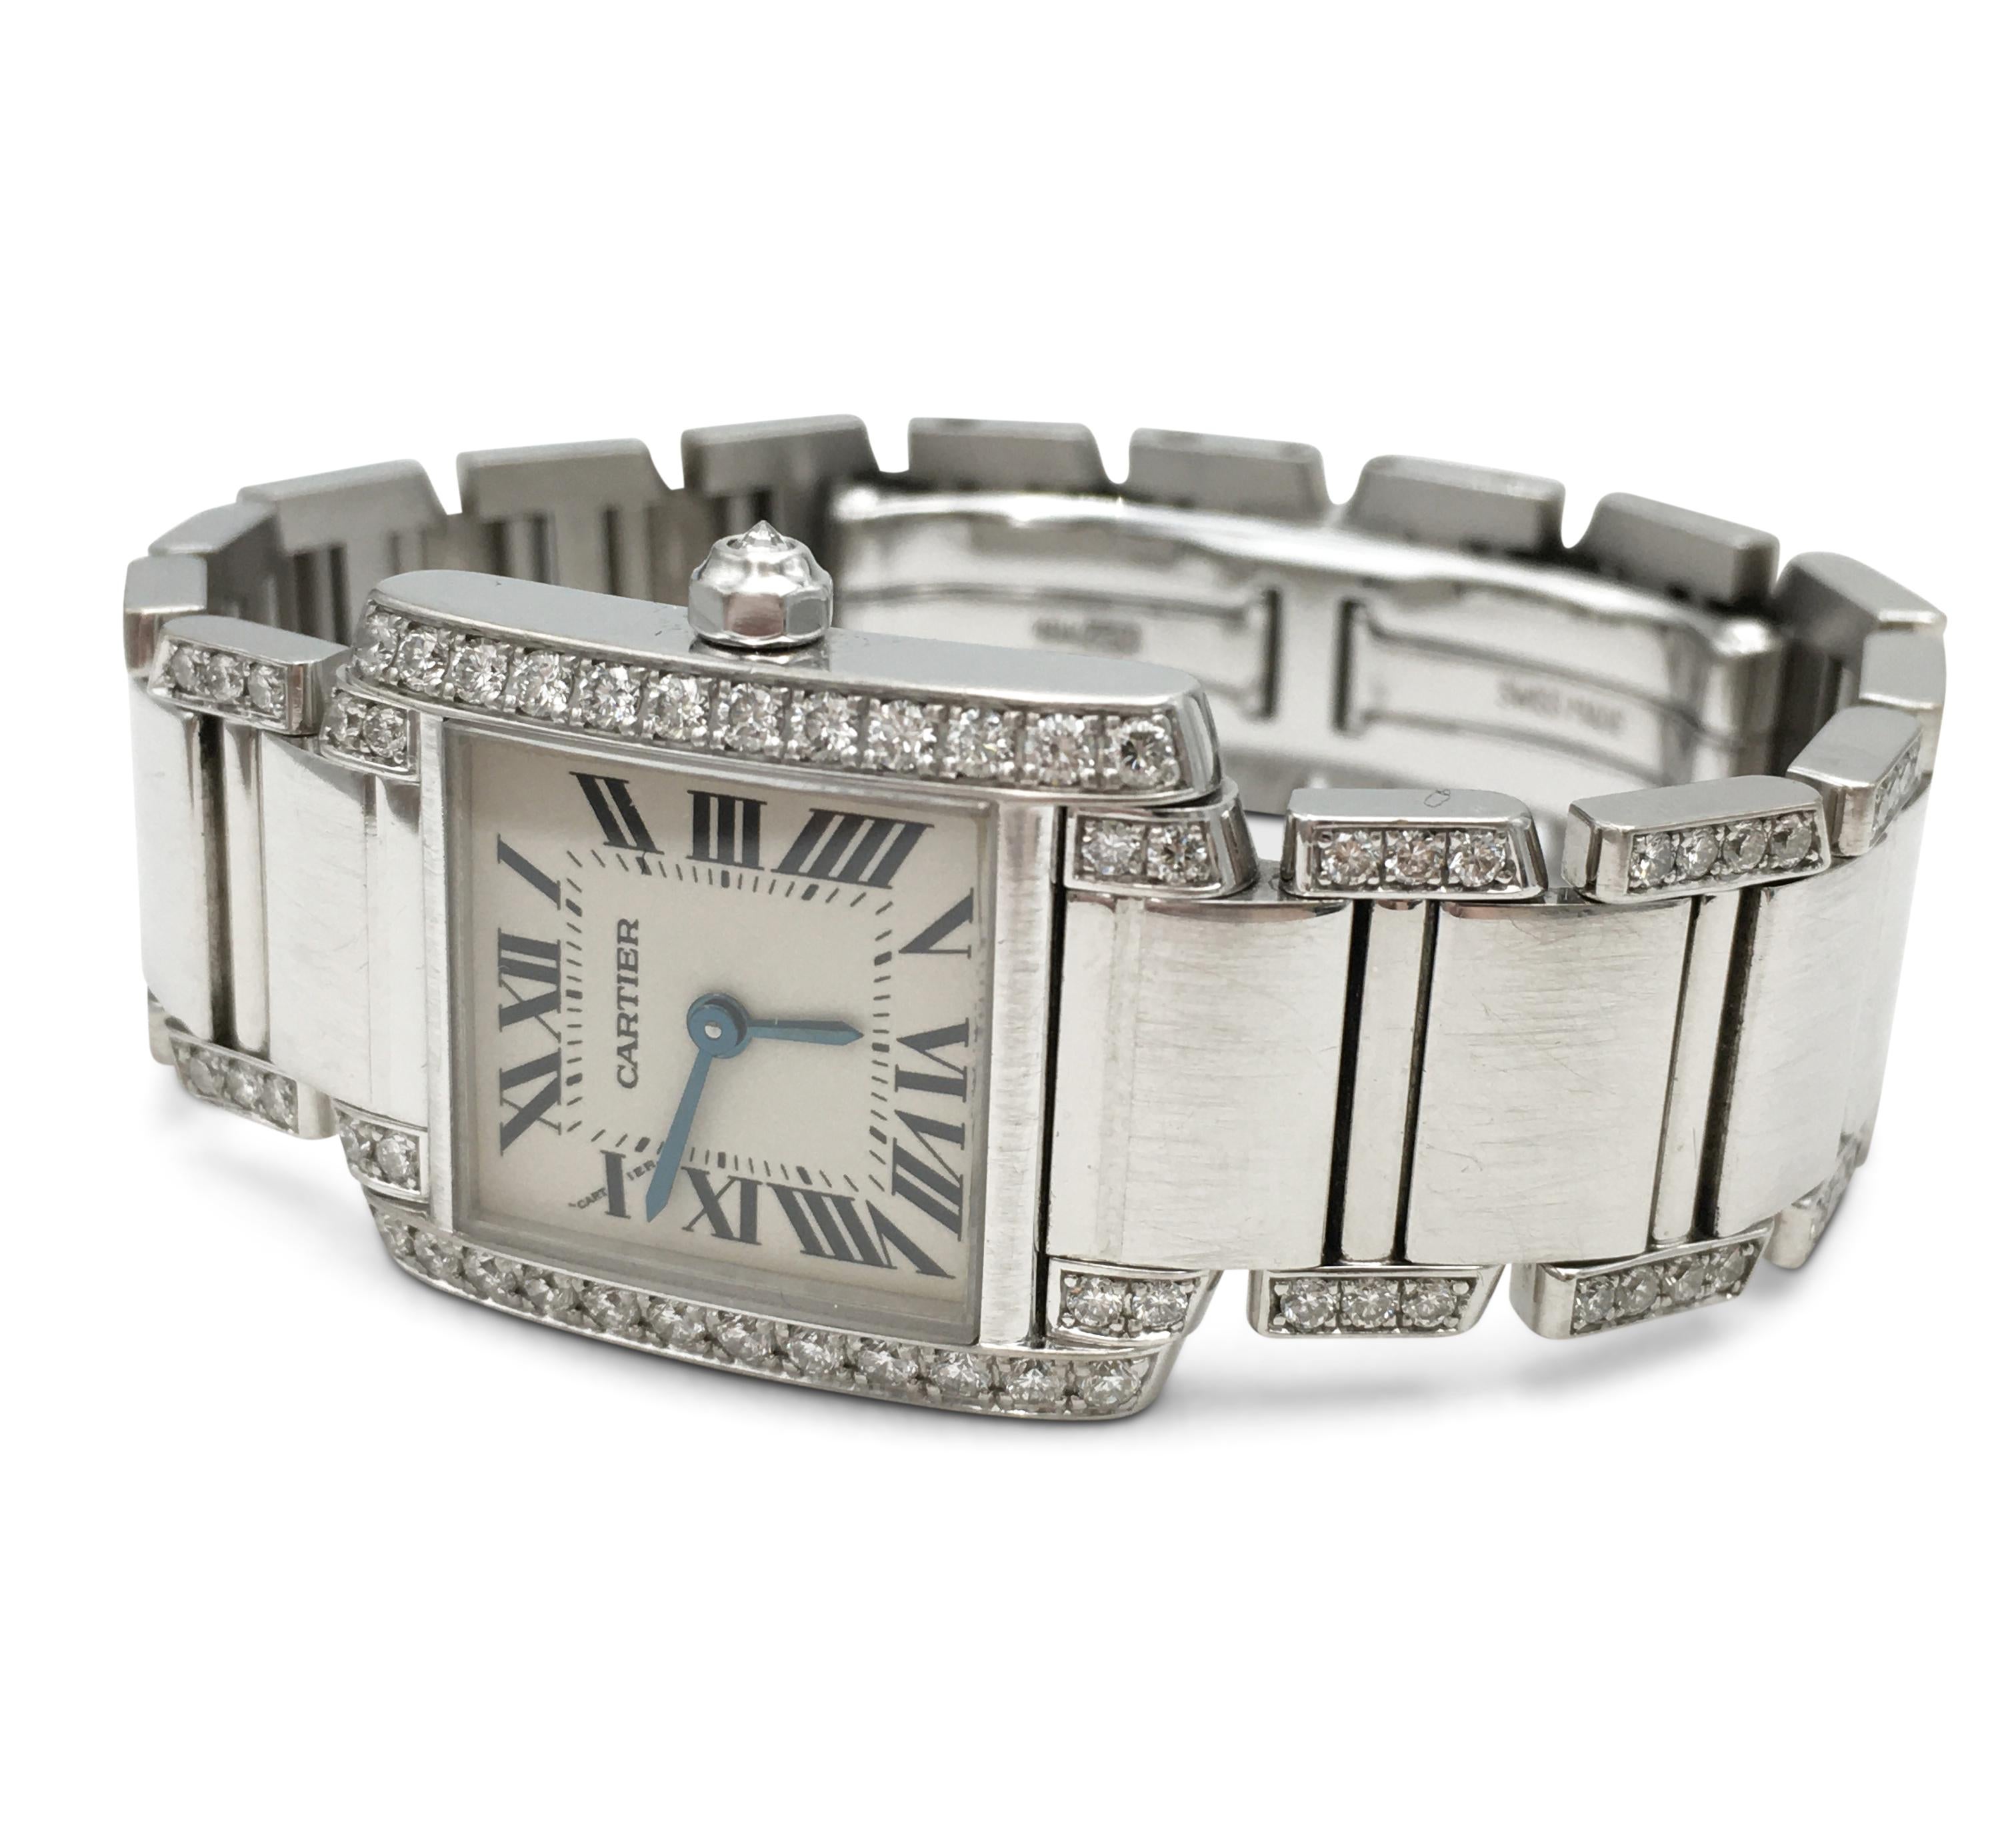 Authentic Cartier 'Tank Francaise' watch crafted in 18 karat white gold. The rectangular case (20 mm x 25 mm) is set with high-quality round brilliant cut diamonds and the octagonal crown is set with one diamond. Silvered dial with painted black